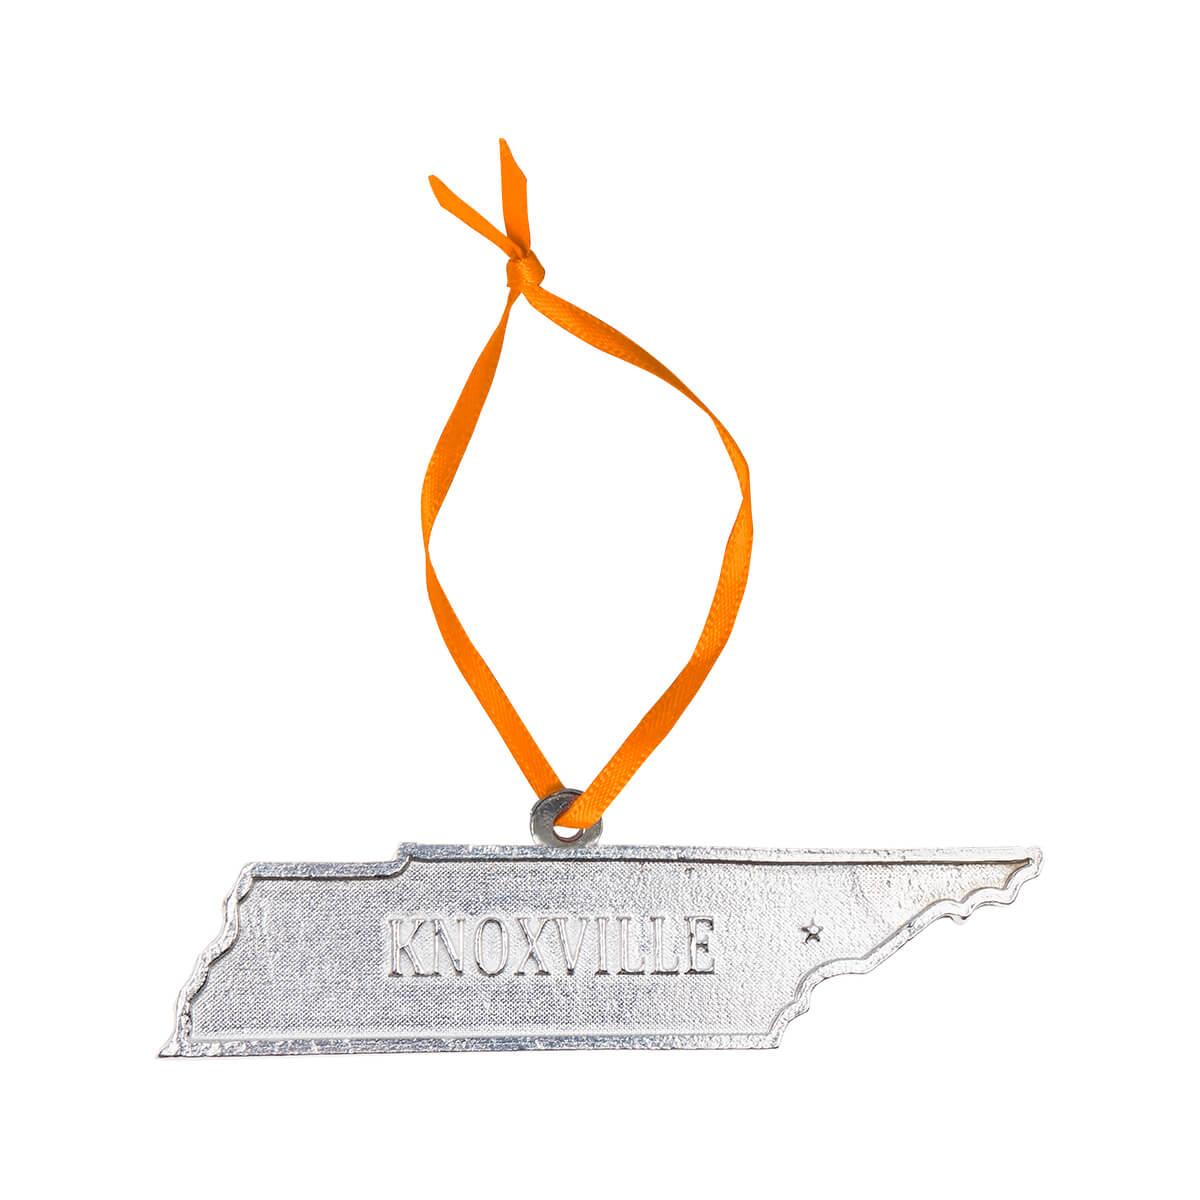  Knoxville Tn Pewter Ornament